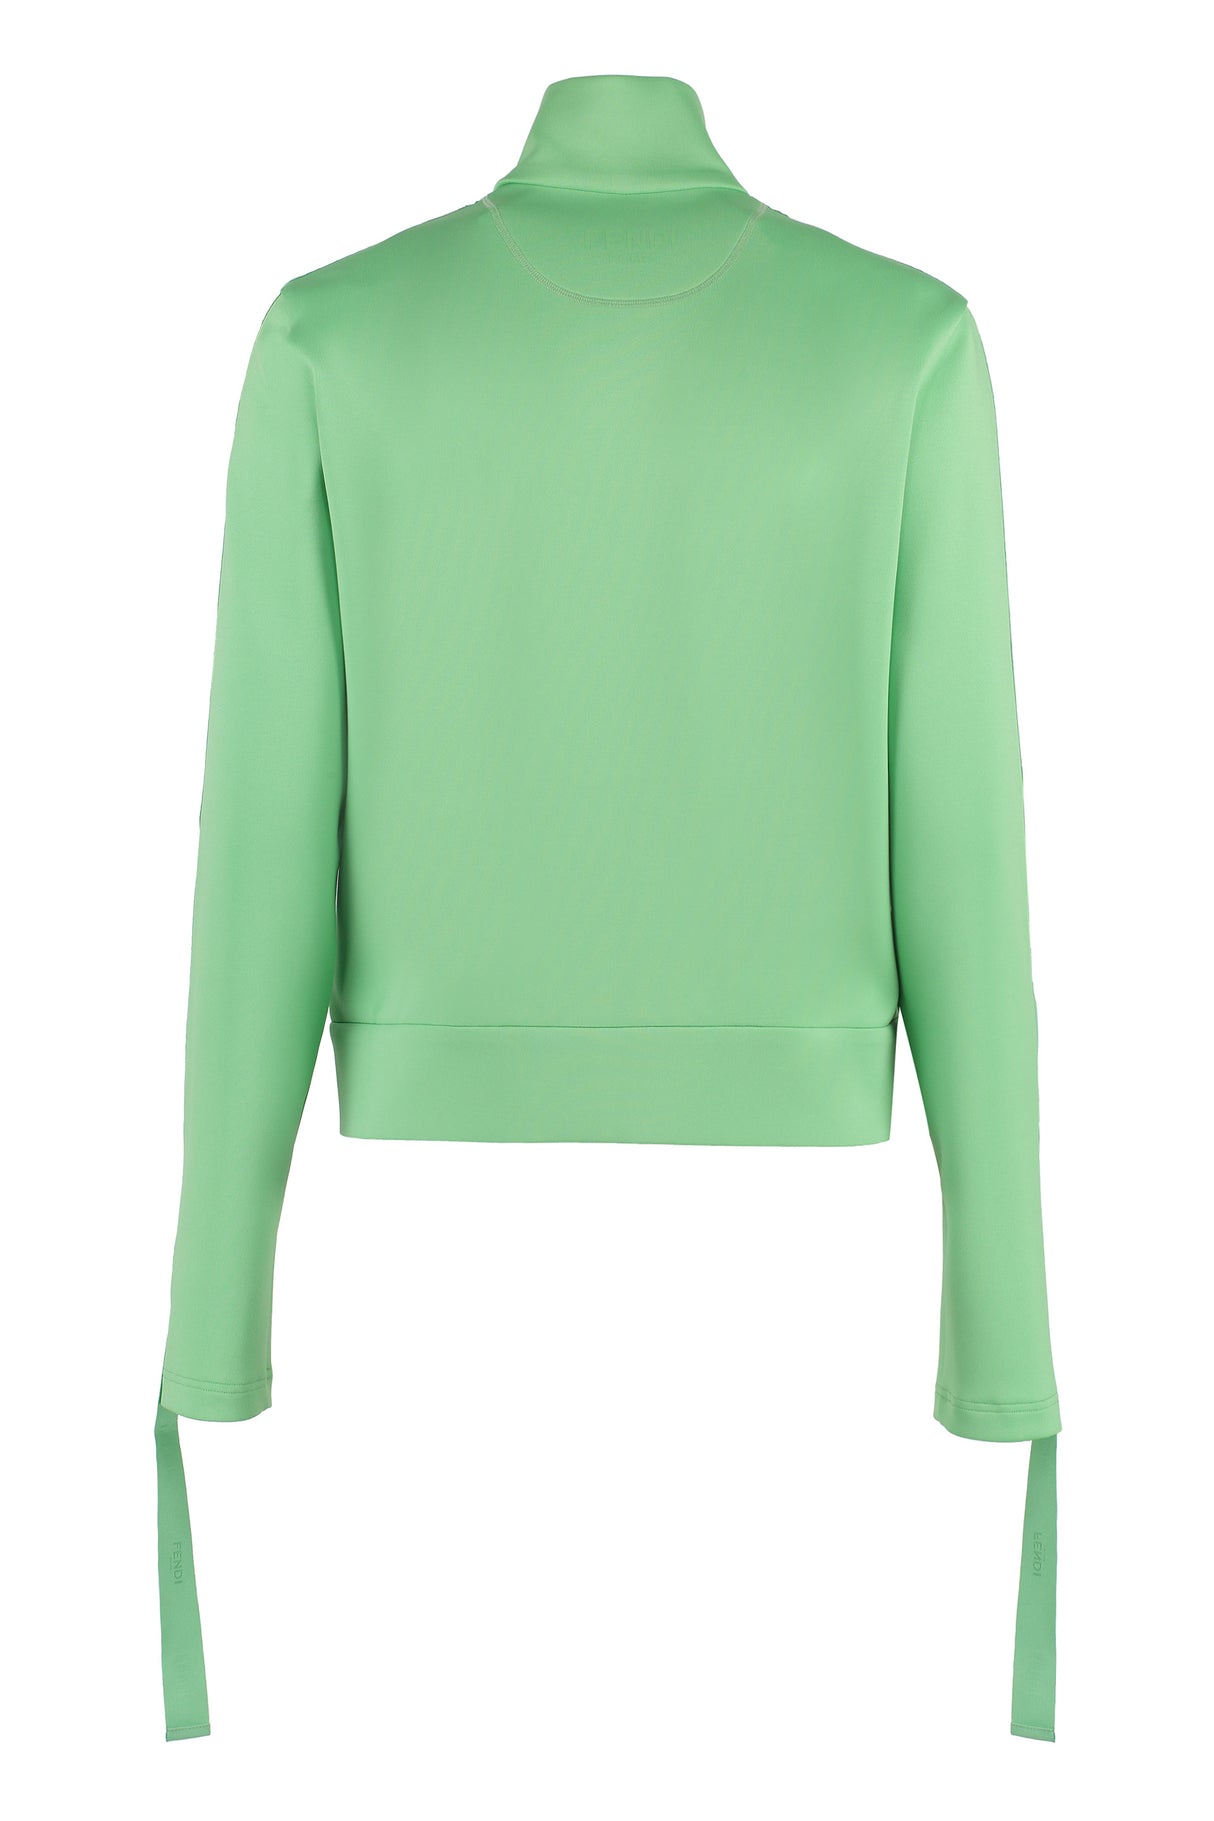 Women's Green Sweatshirt for the Fashion-Forward - SS23 Collection